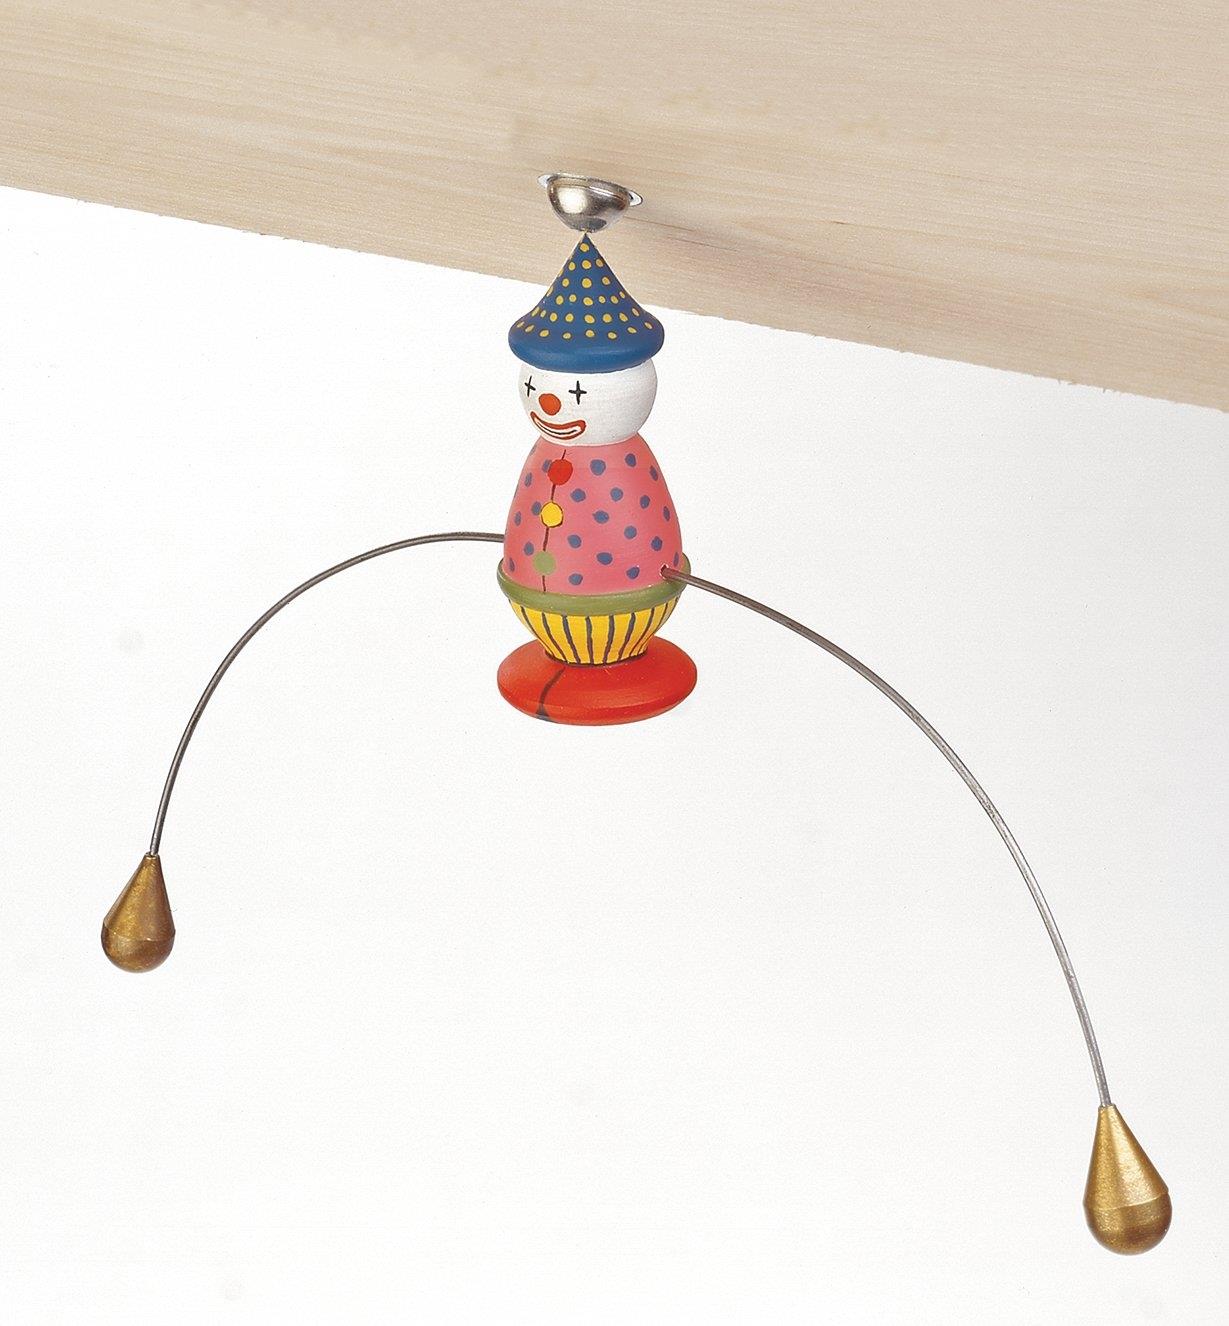 Clown mobile made with a Hemispherical Magnet